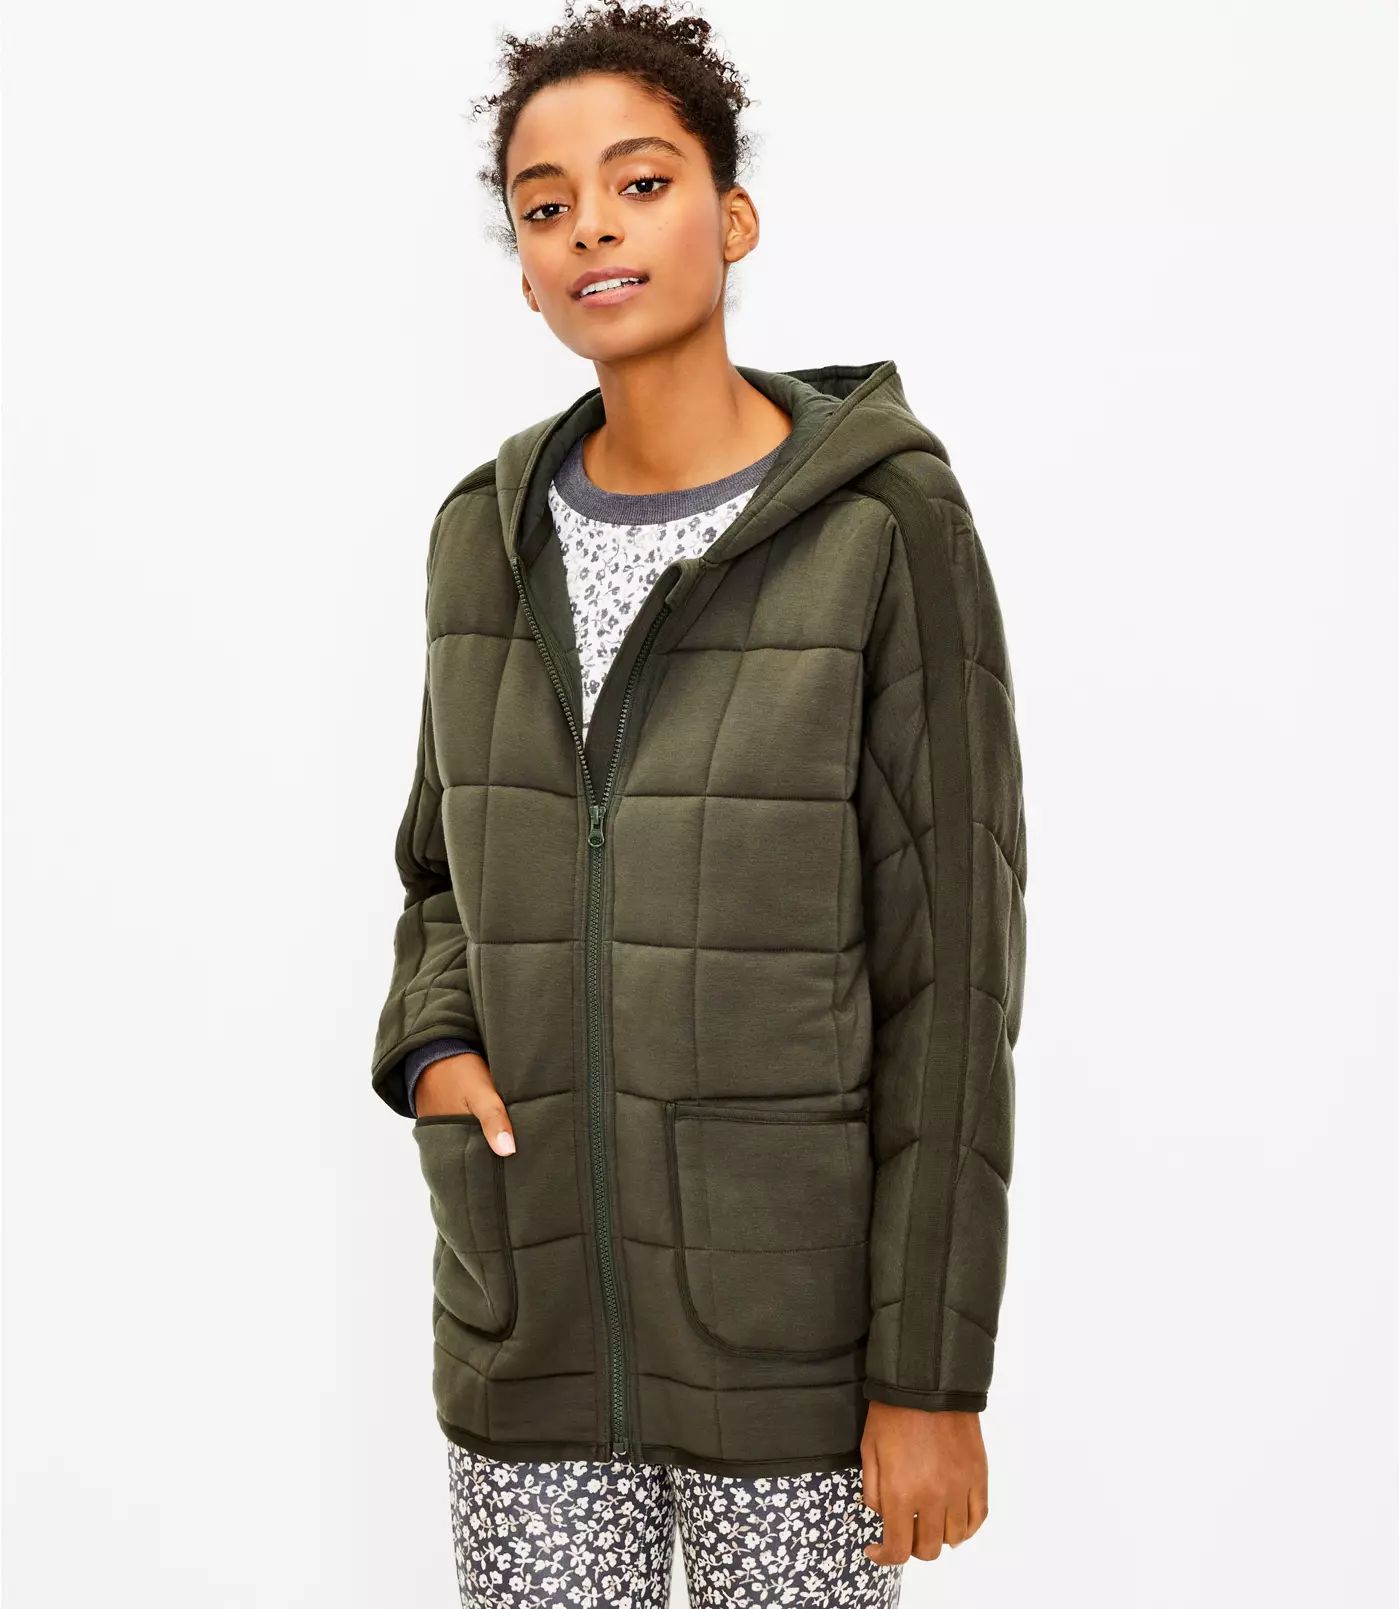 Lou & Grey Signature Softblend Quilted Jacket | LOFT